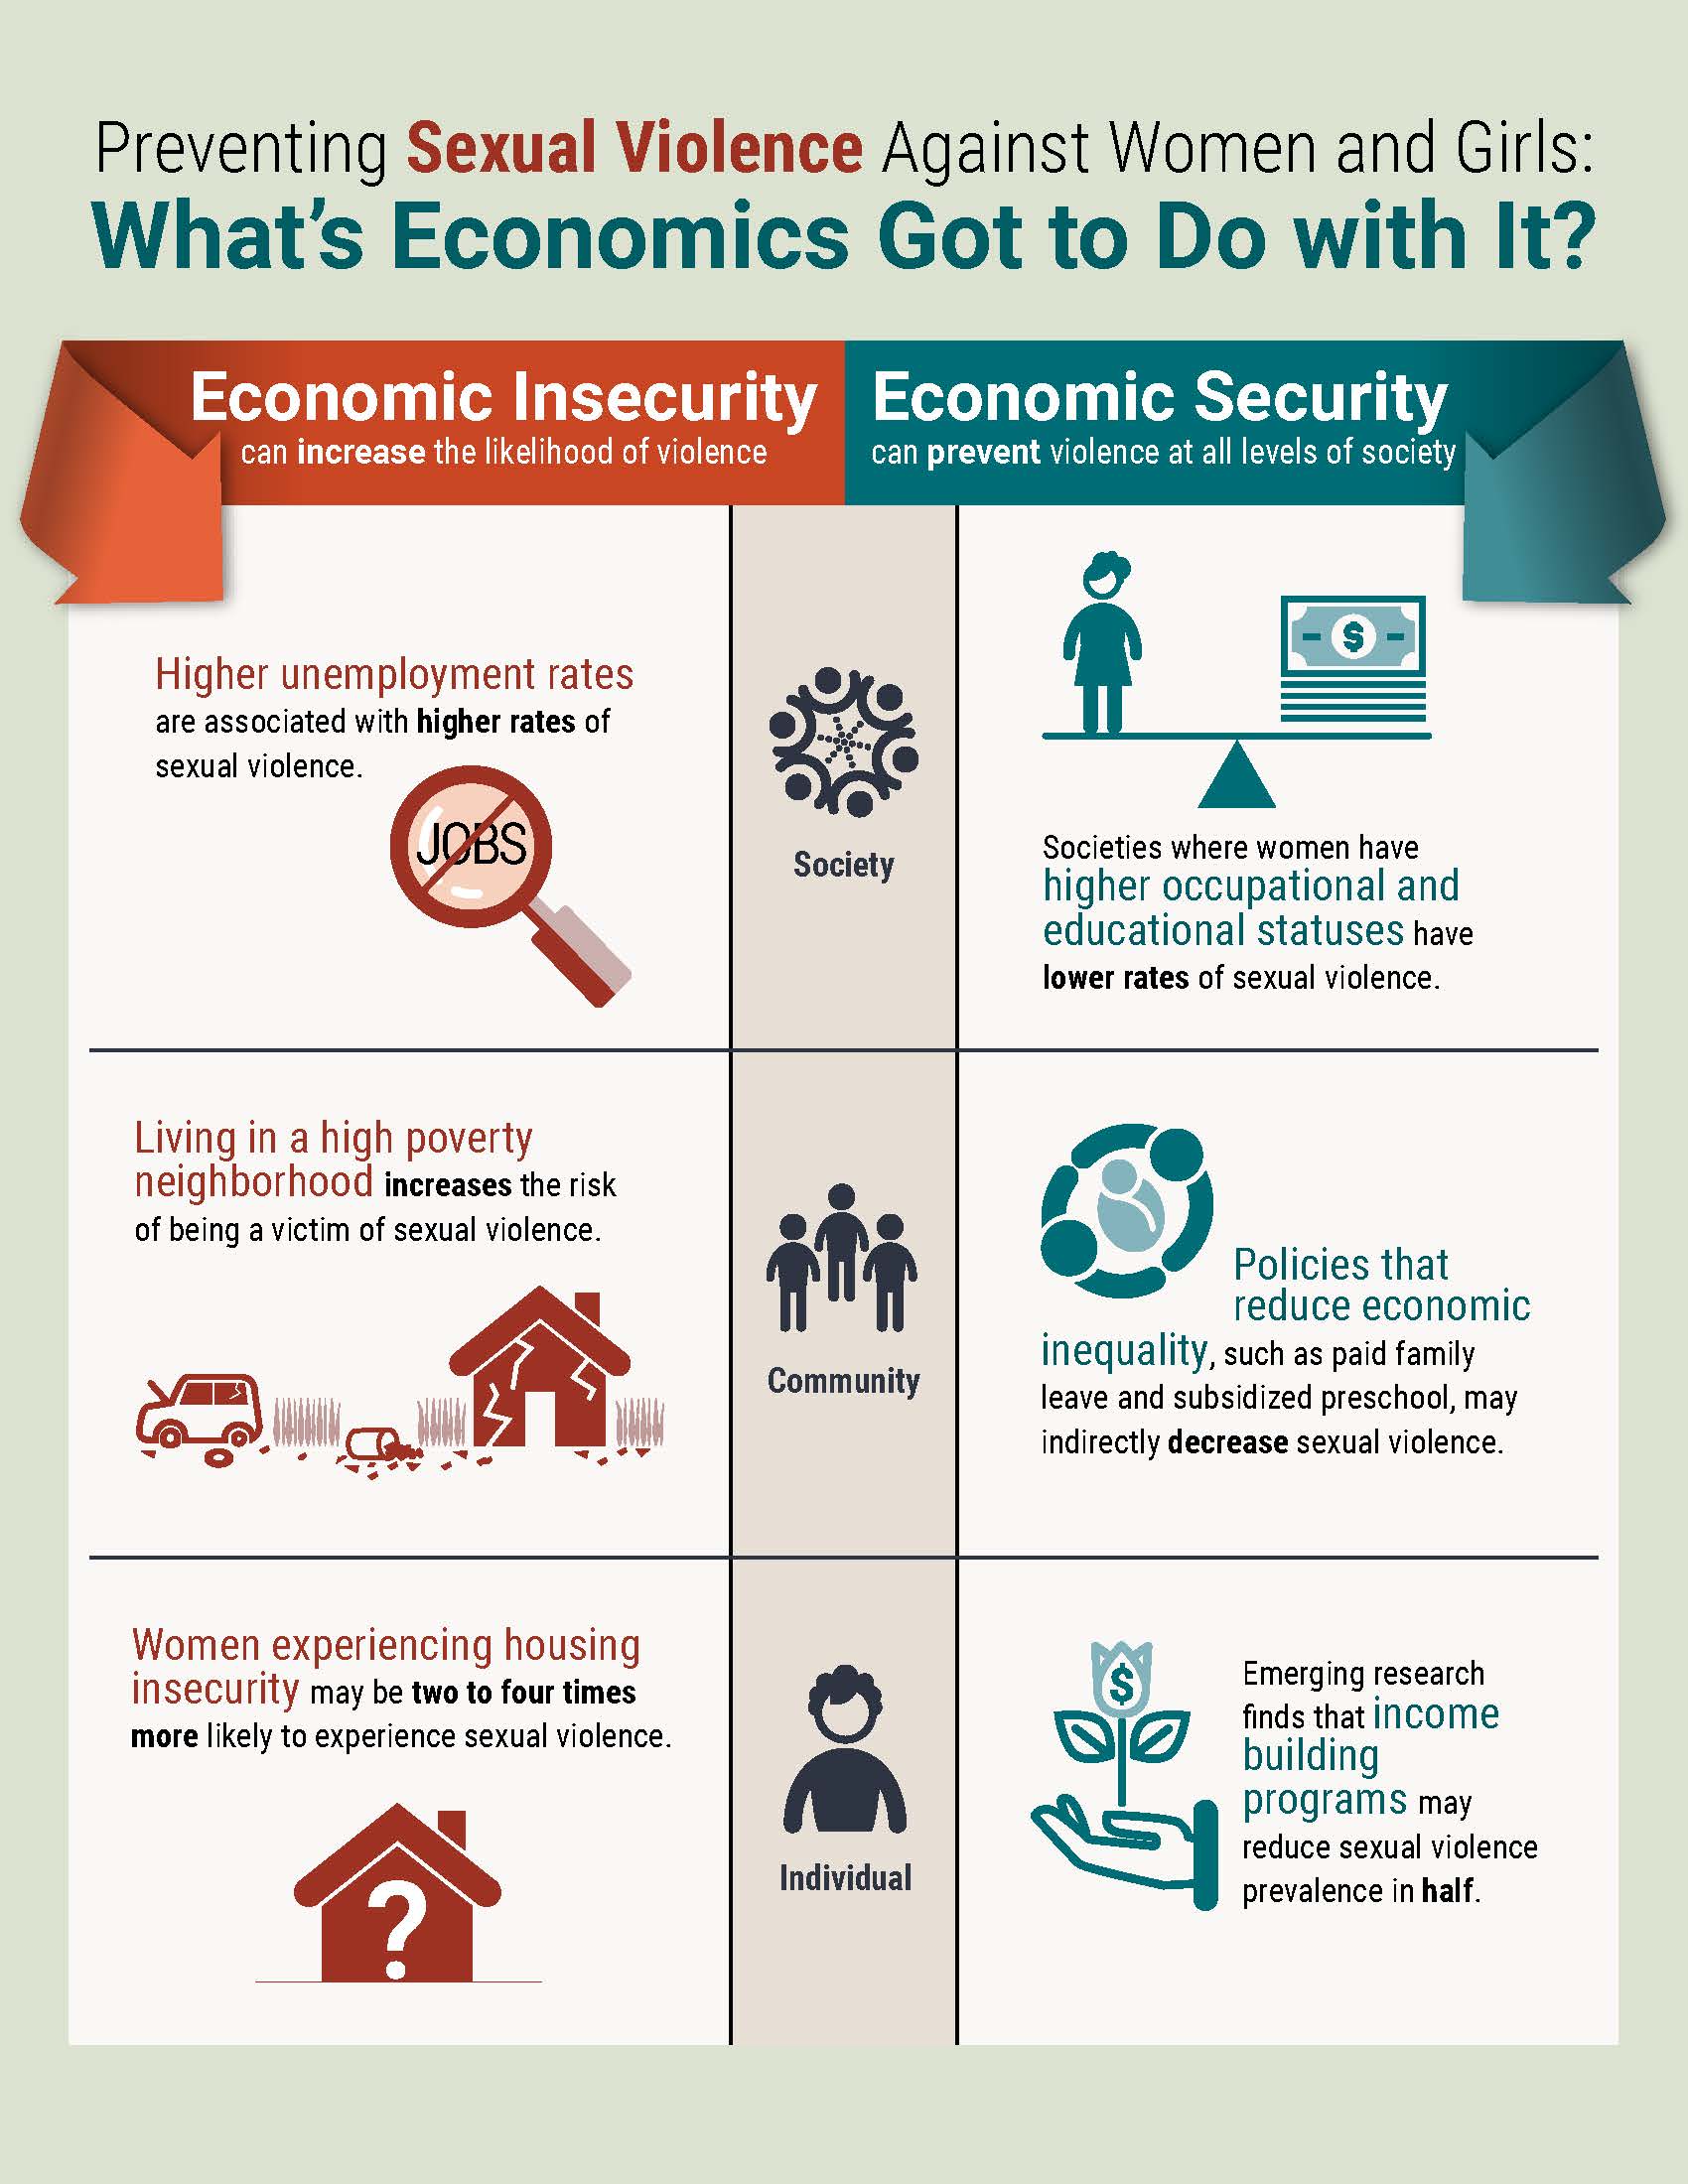 Economic Security and Preventing Sexual Violence